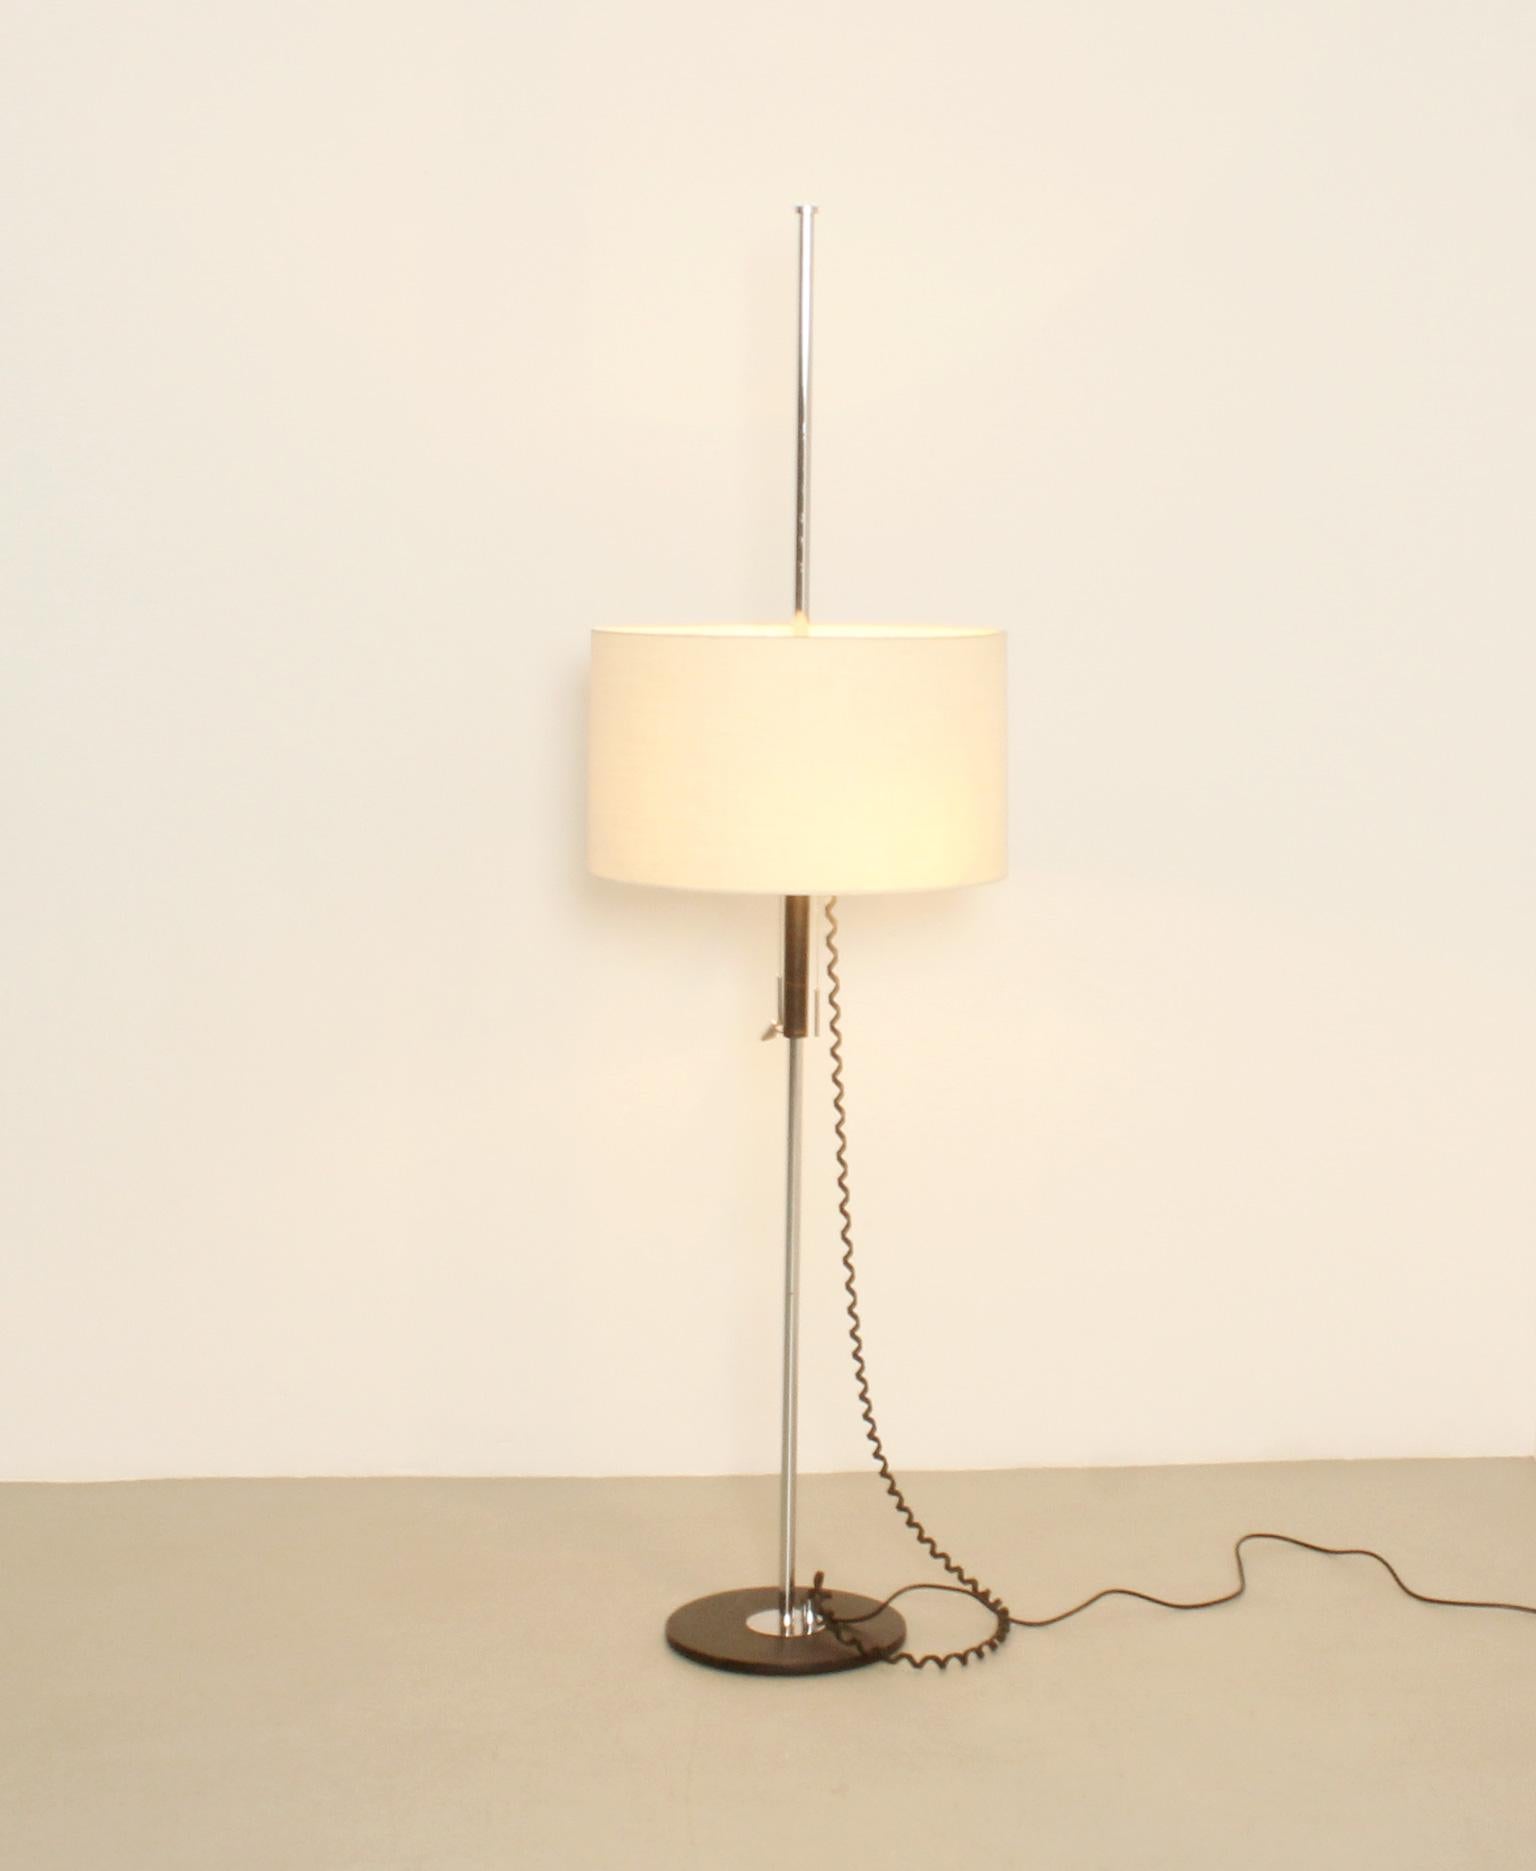 Floor lamp with adjustable height lampshade, Spain, 1960's. Lacquererd and chromed metal with original shade with fabric and two bulbs. The height is easily adjusted thanks to the chrome piece under the shade. 